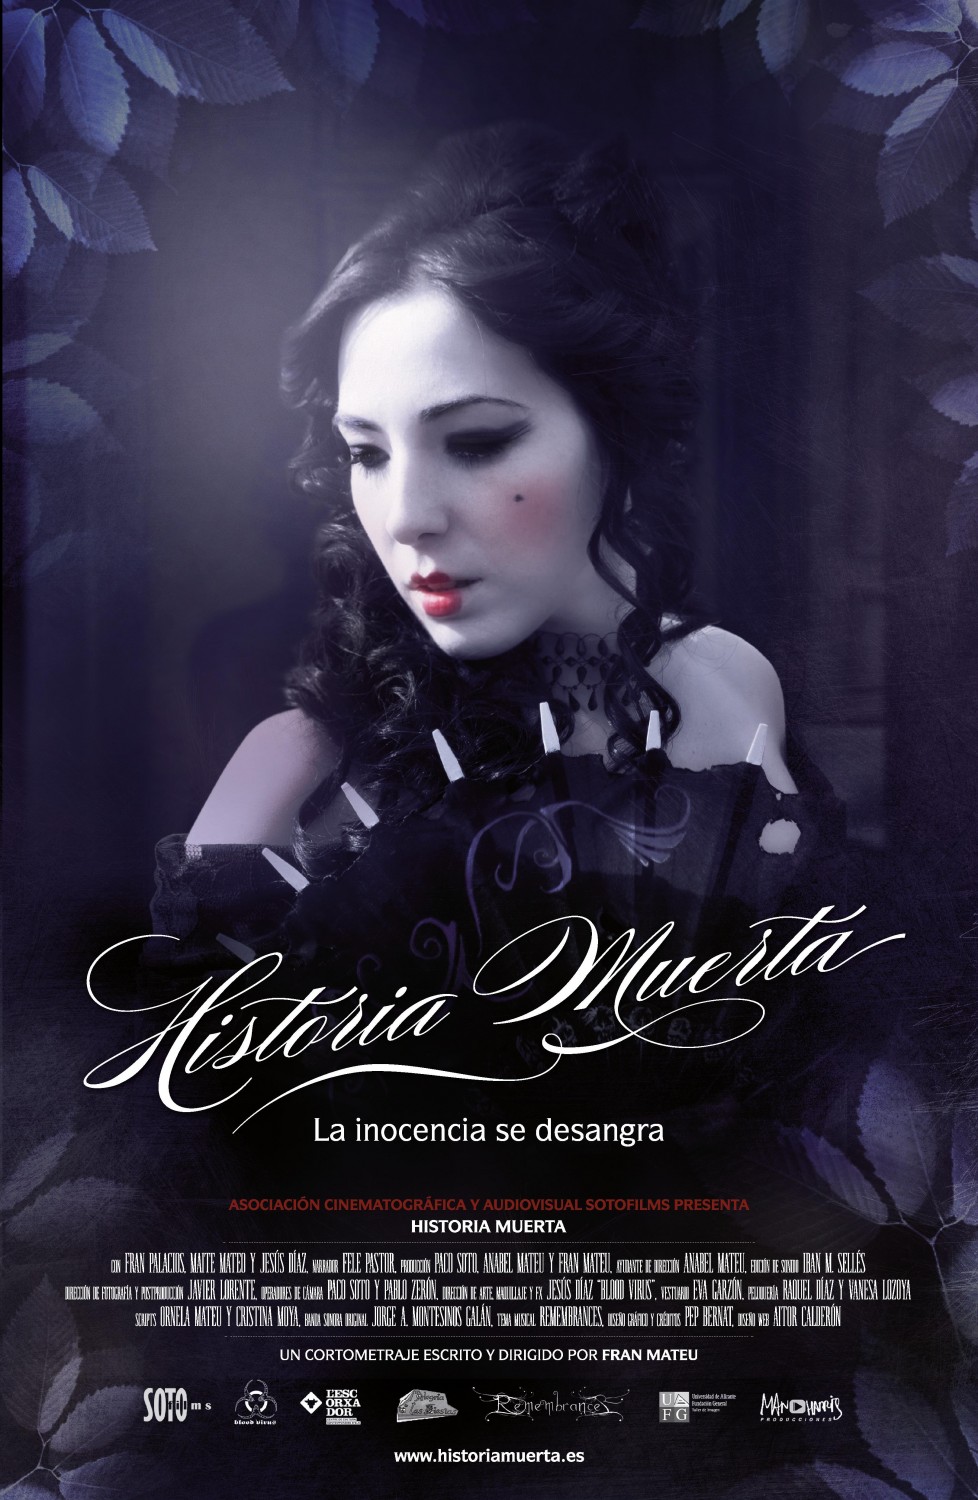 Extra Large Movie Poster Image for Historia Muerta